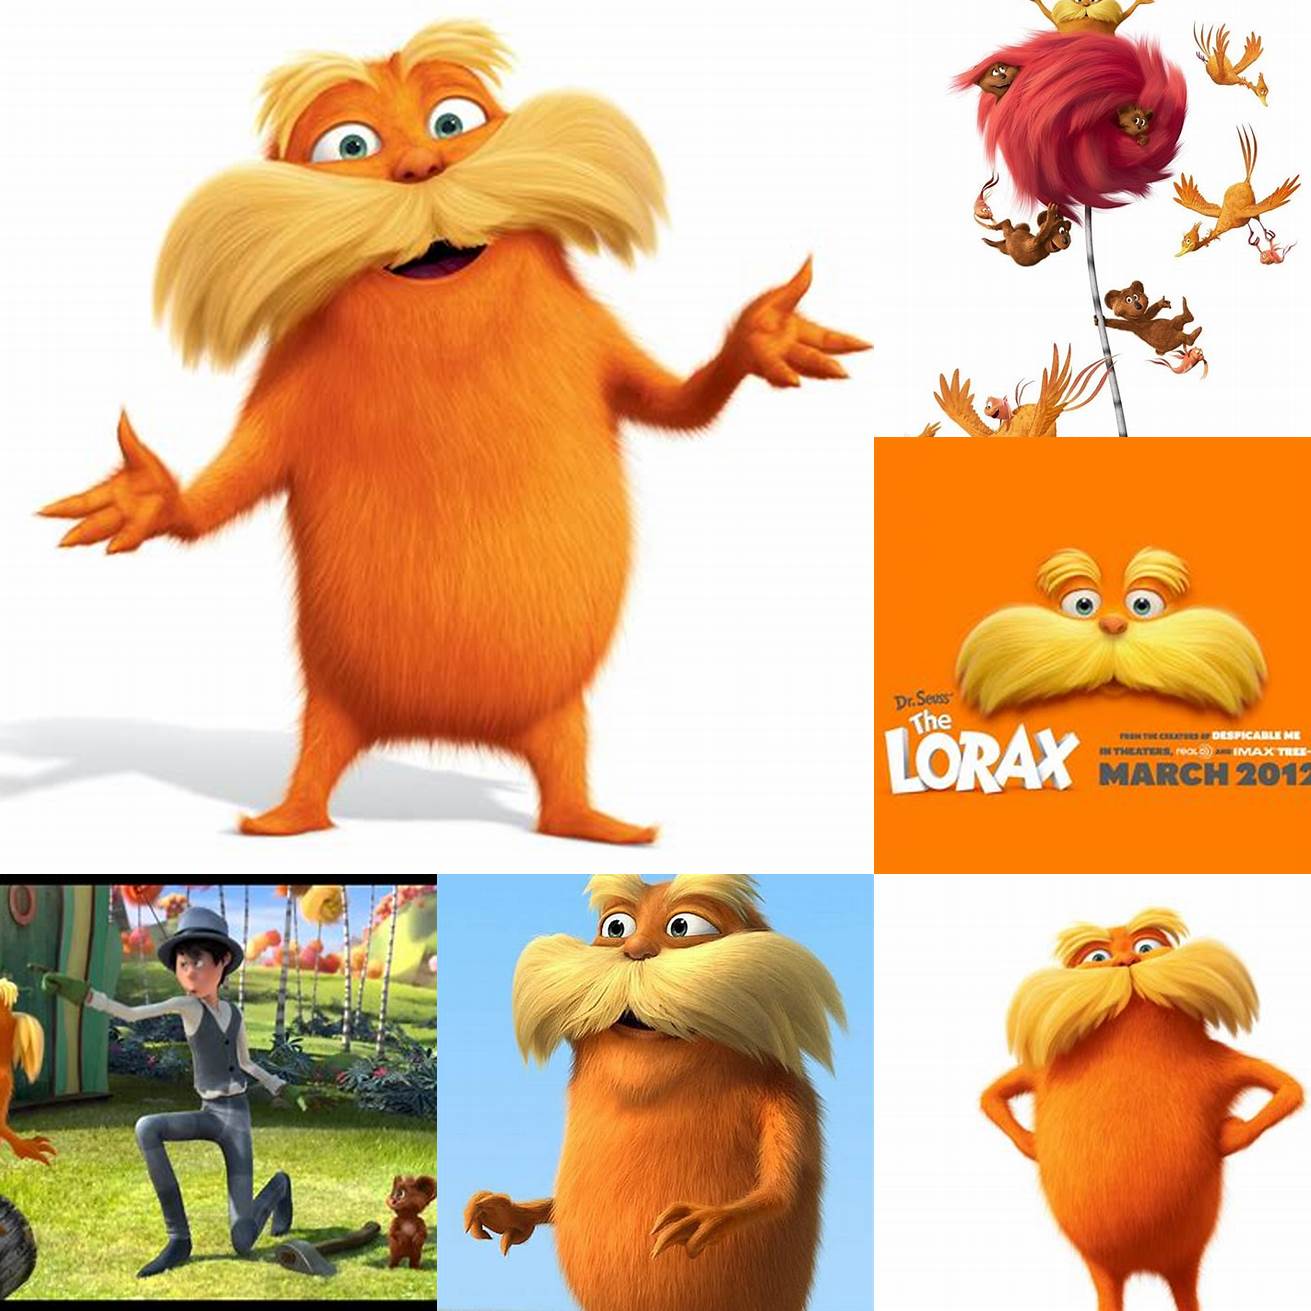 Pin the Tail on the Lorax